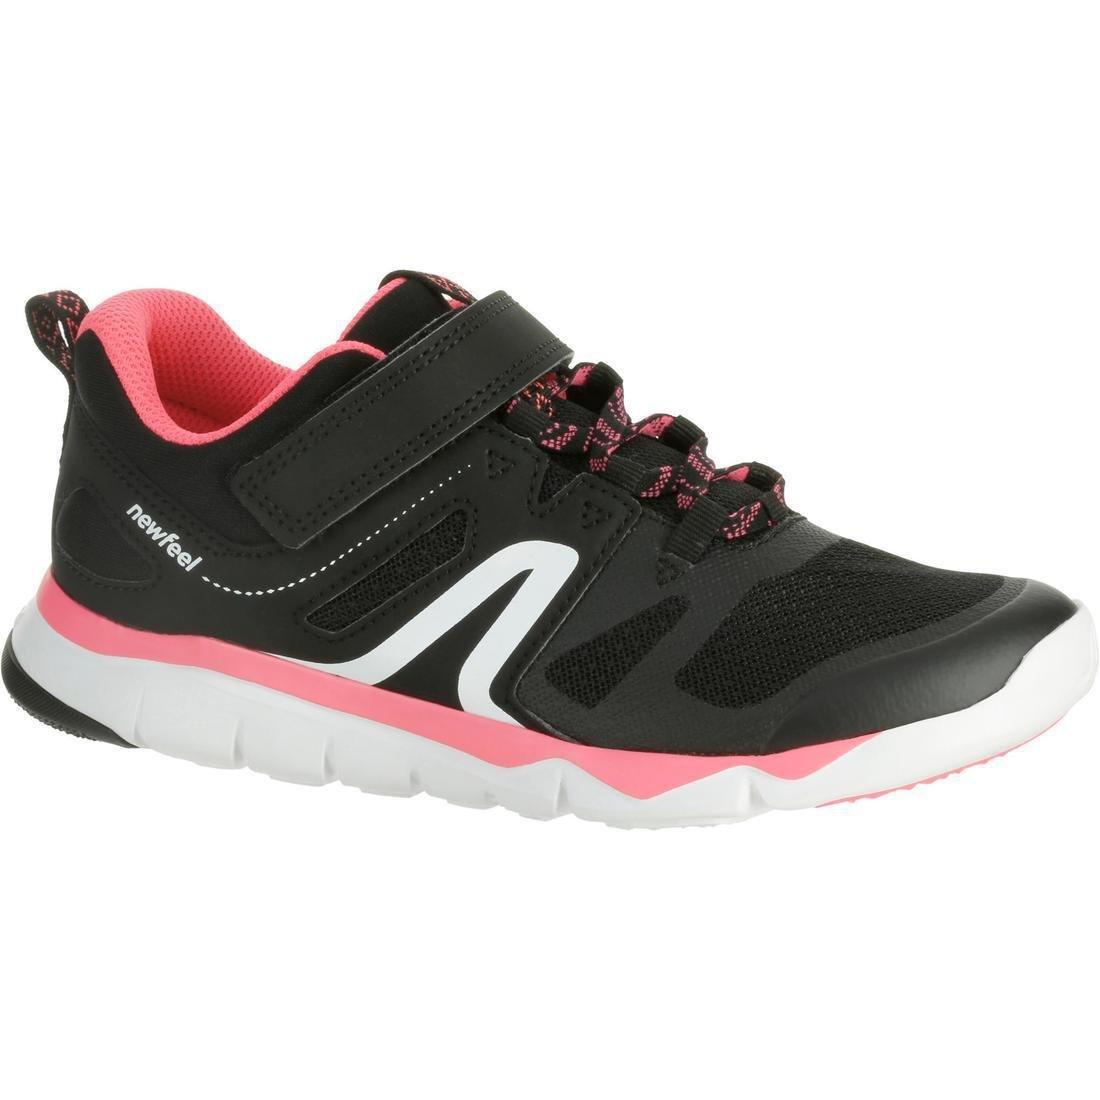 DOMYOS - Kids Girls Lightweight And Breathable Rip-Tab Trainers - Pw 540, Black